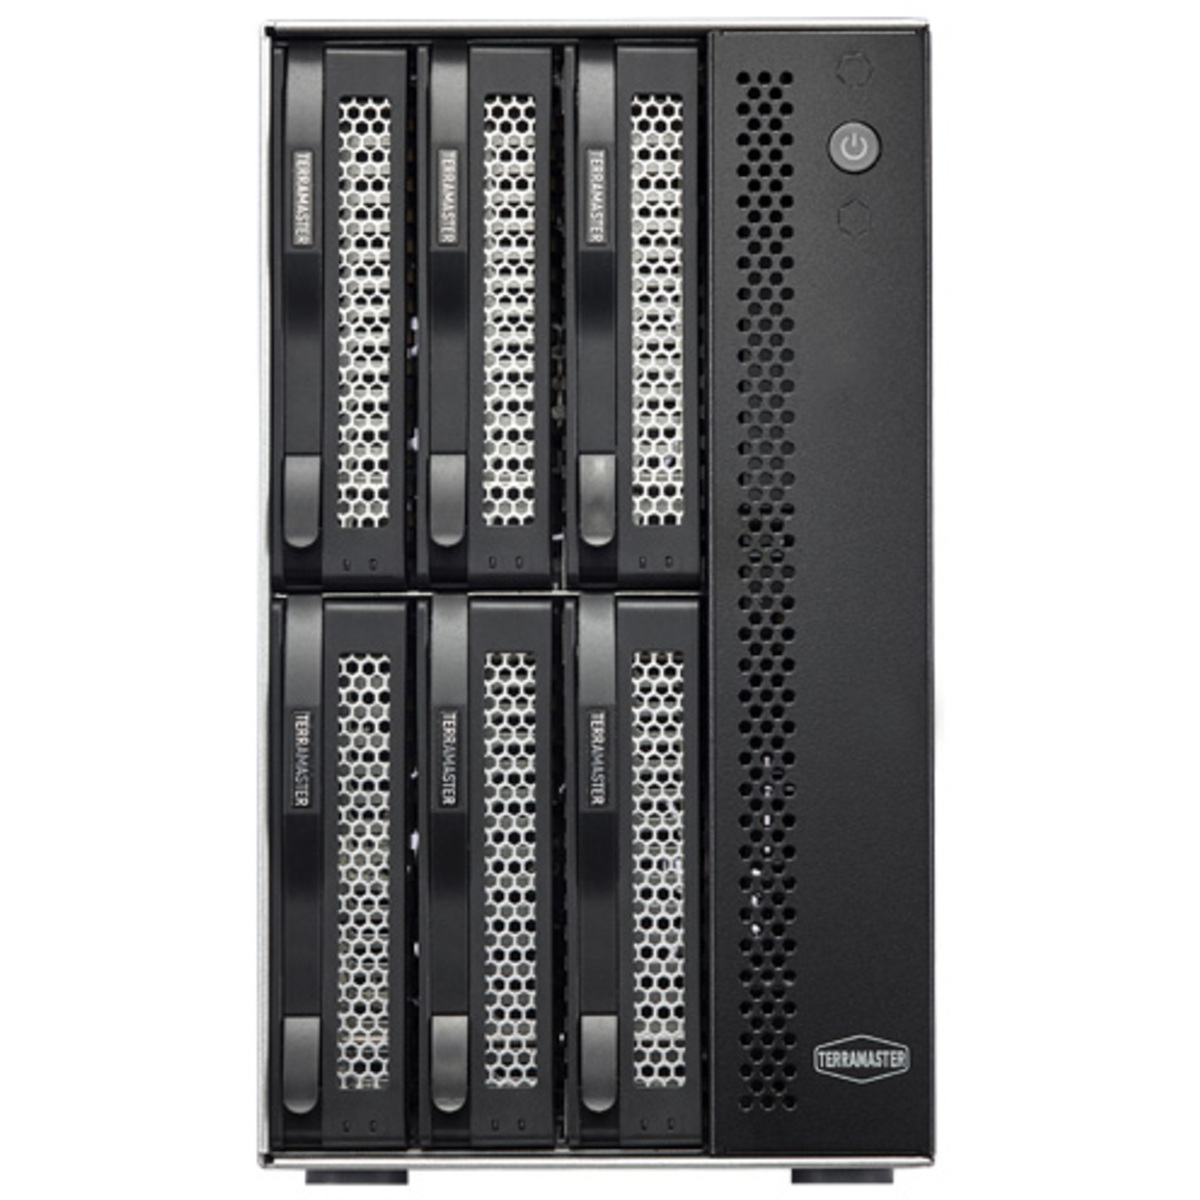 TerraMaster T6-423 132tb 6-Bay Desktop Multimedia / Power User / Business NAS - Network Attached Storage Device 6x22tb Toshiba Enterprise Capacity MG10AFA22TE 3.5 7200rpm SATA 6Gb/s HDD ENTERPRISE Class Drives Installed - Burn-In Tested - FREE RAM UPGRADE T6-423